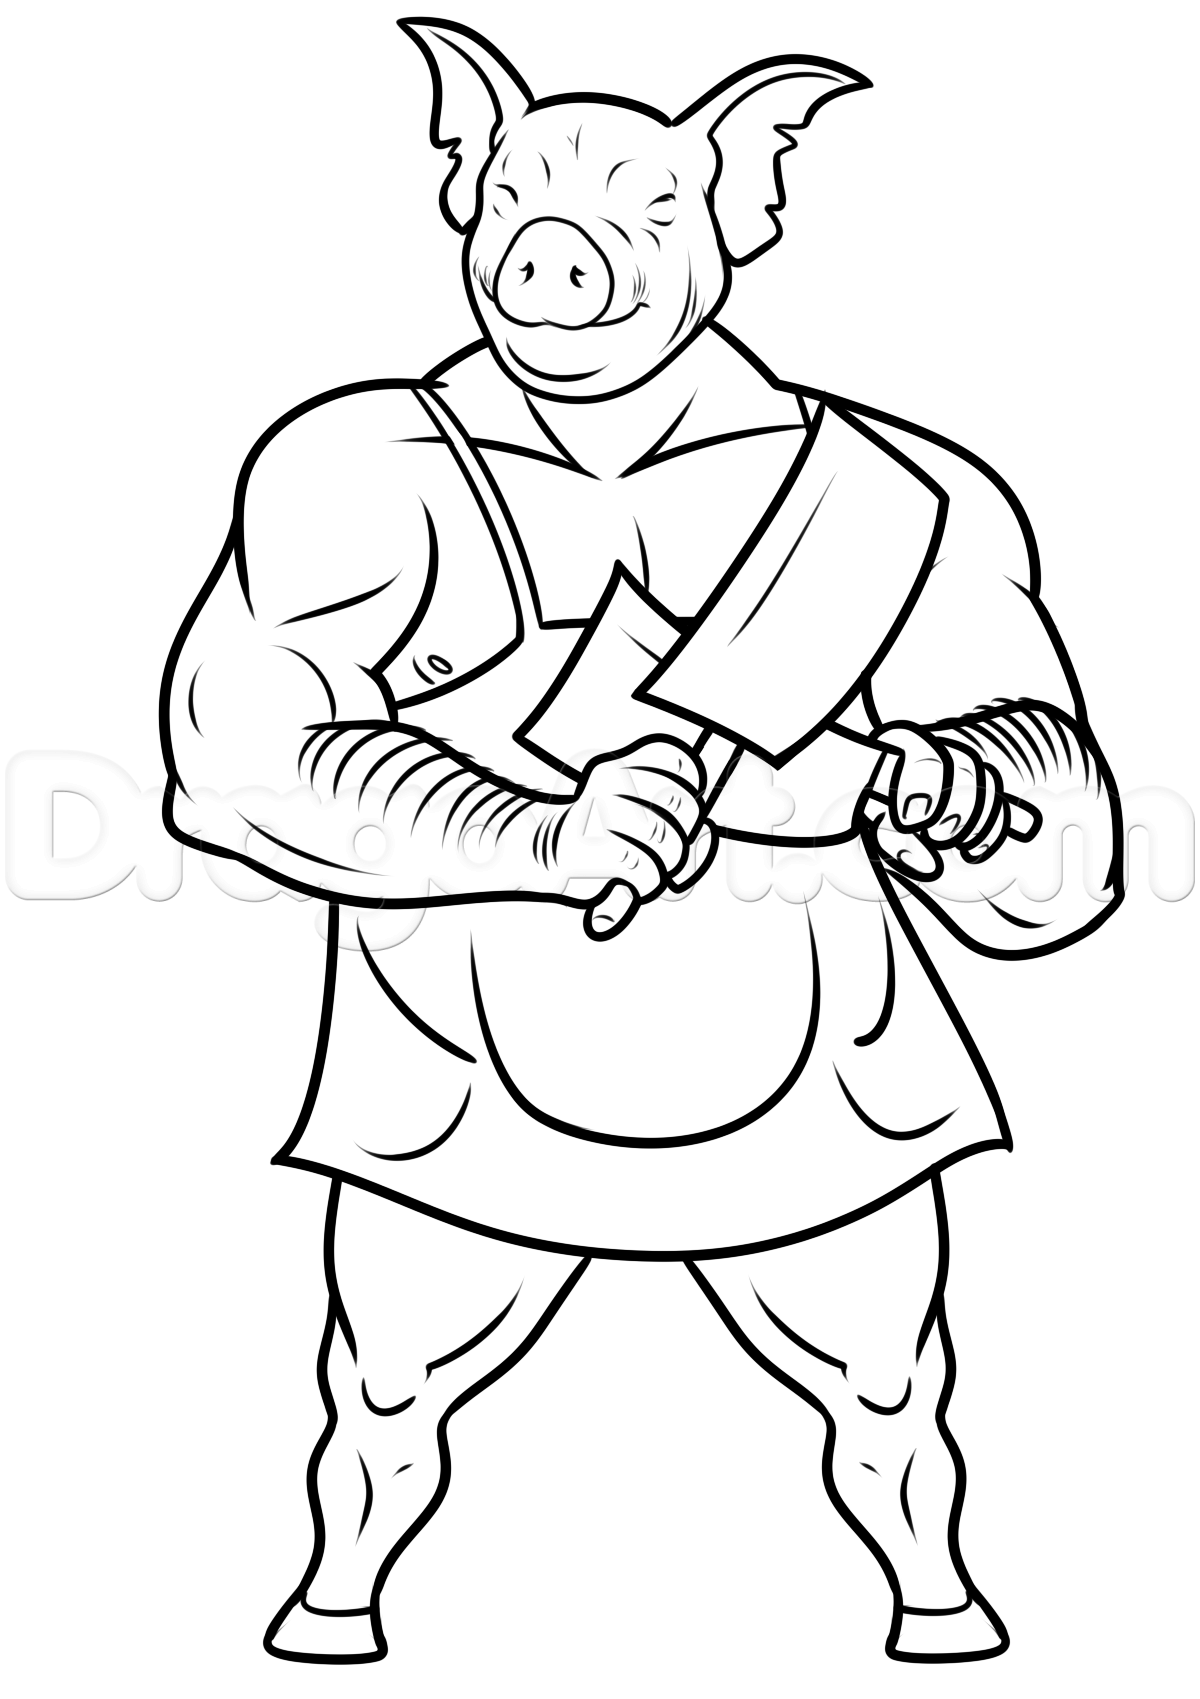 butcher-drawing-tutorial-step-8_1_000000186705_5